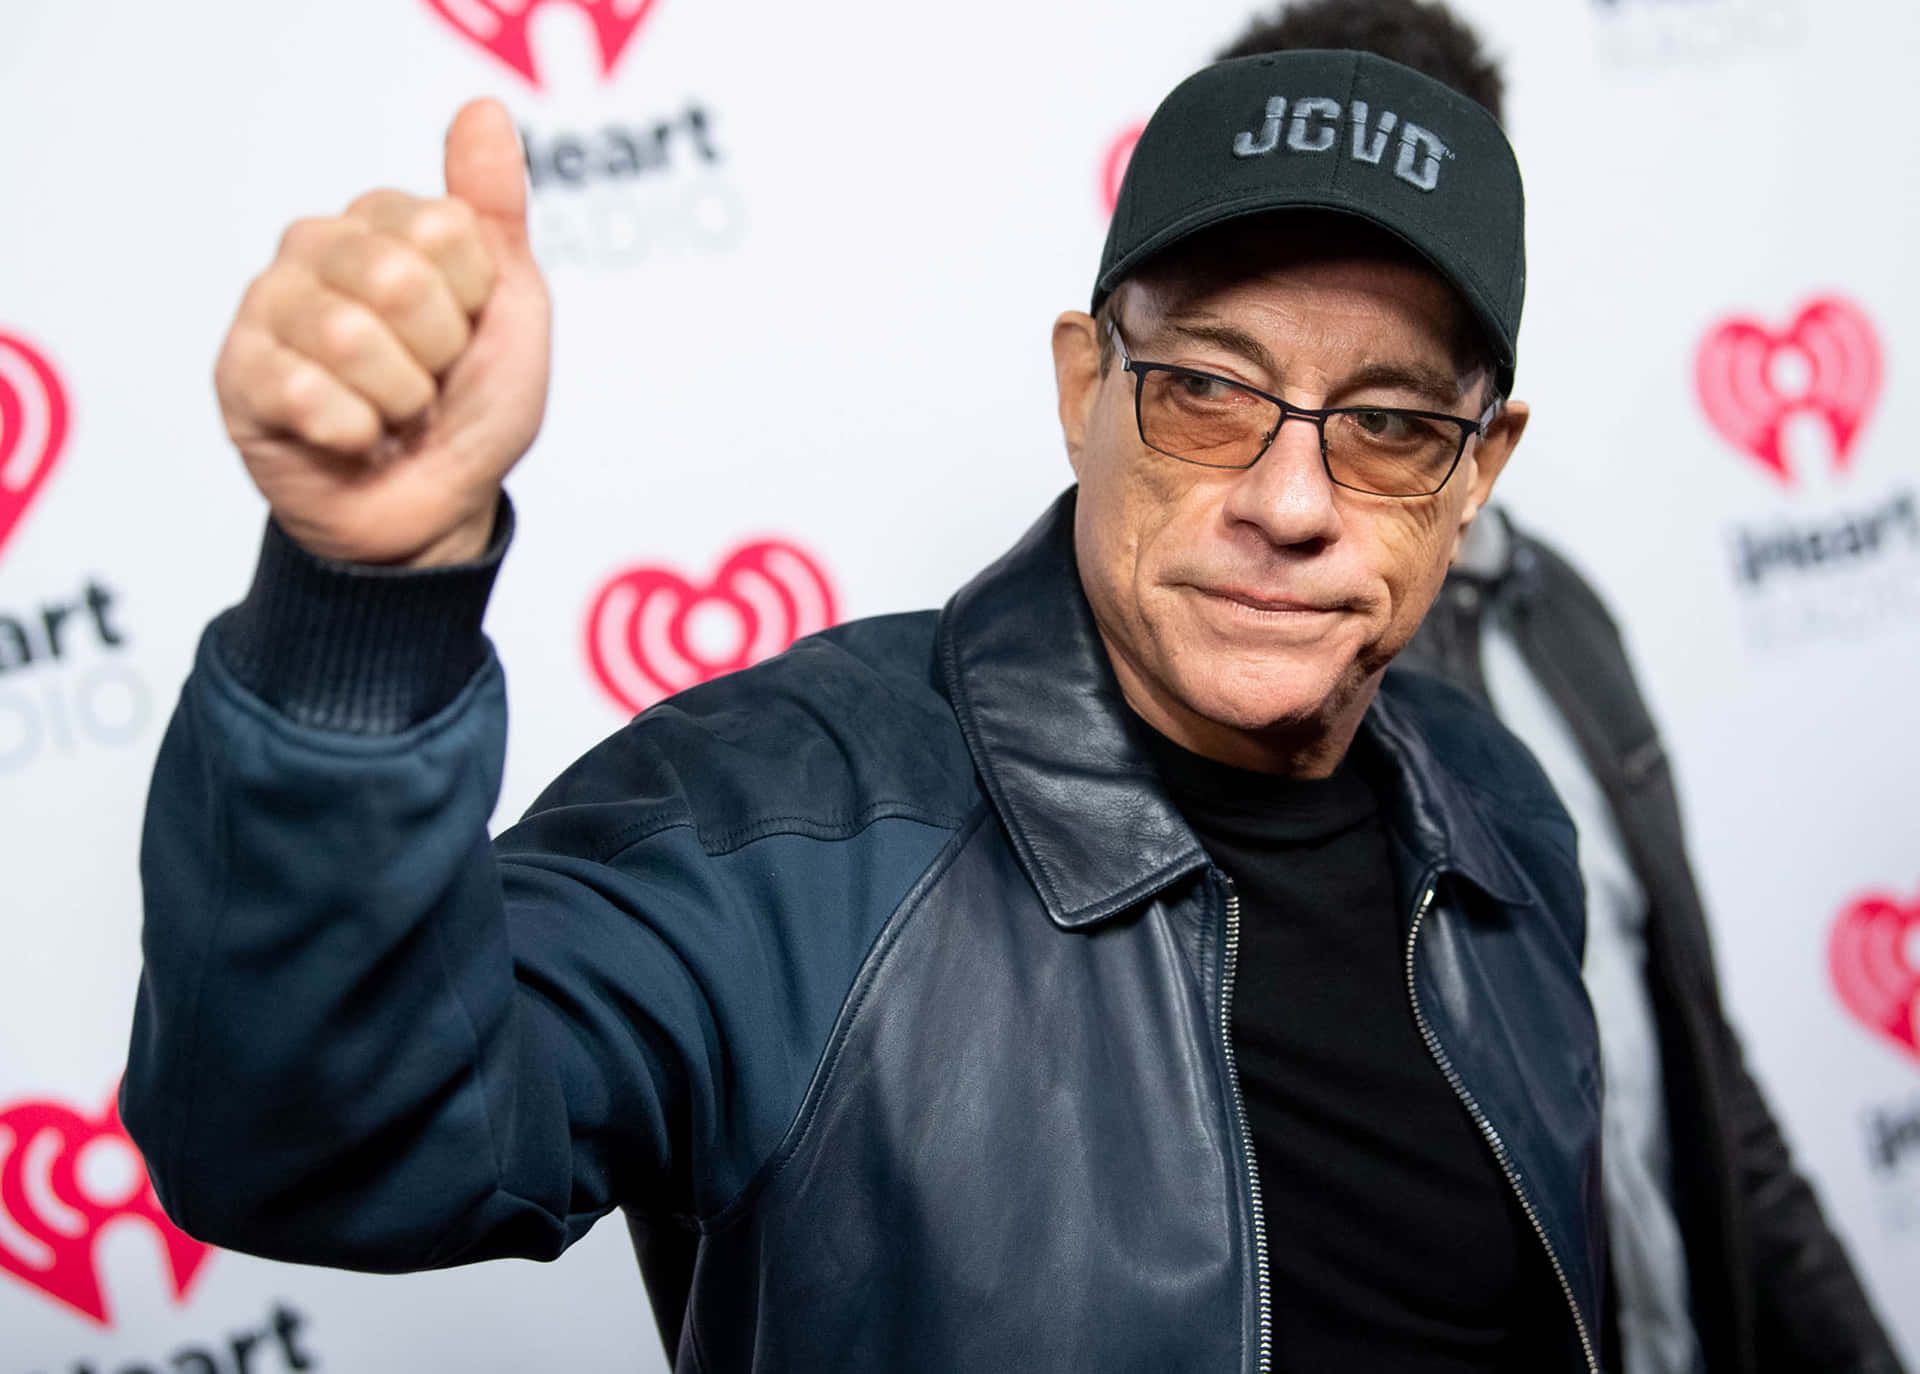 Jean-claude Van Damme In His Iconic Action Stance.